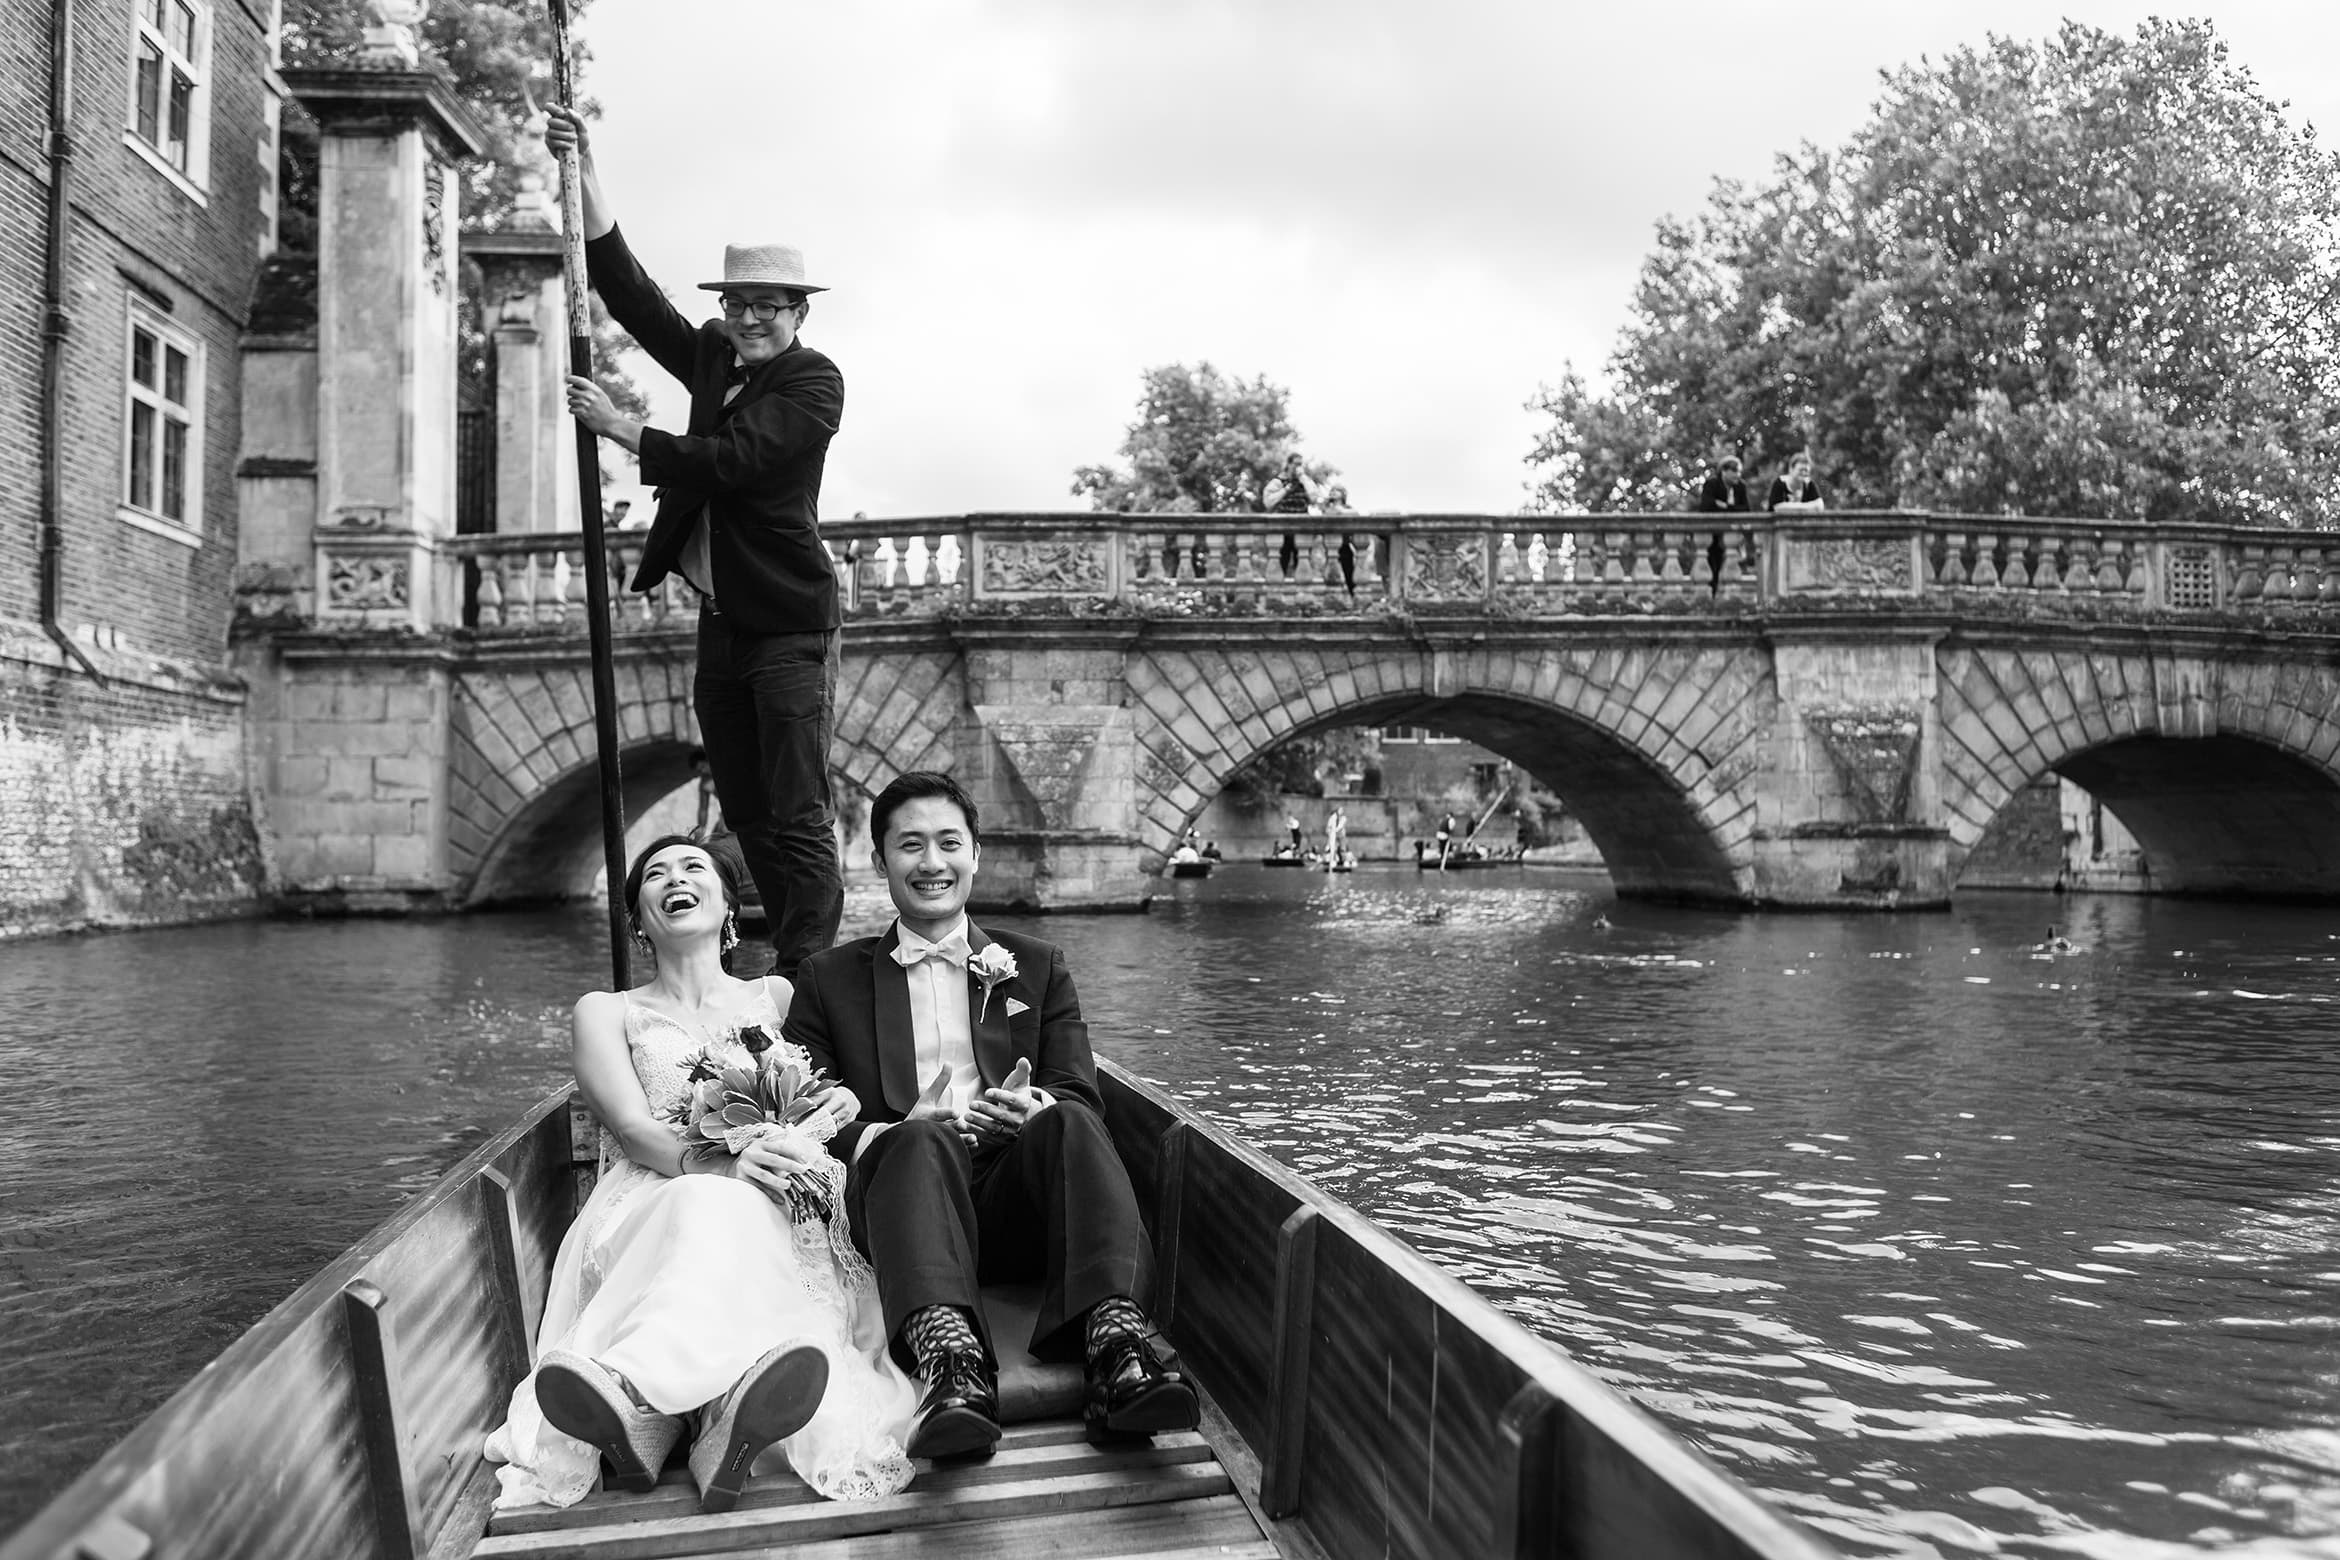 enjoying a moment in the punt